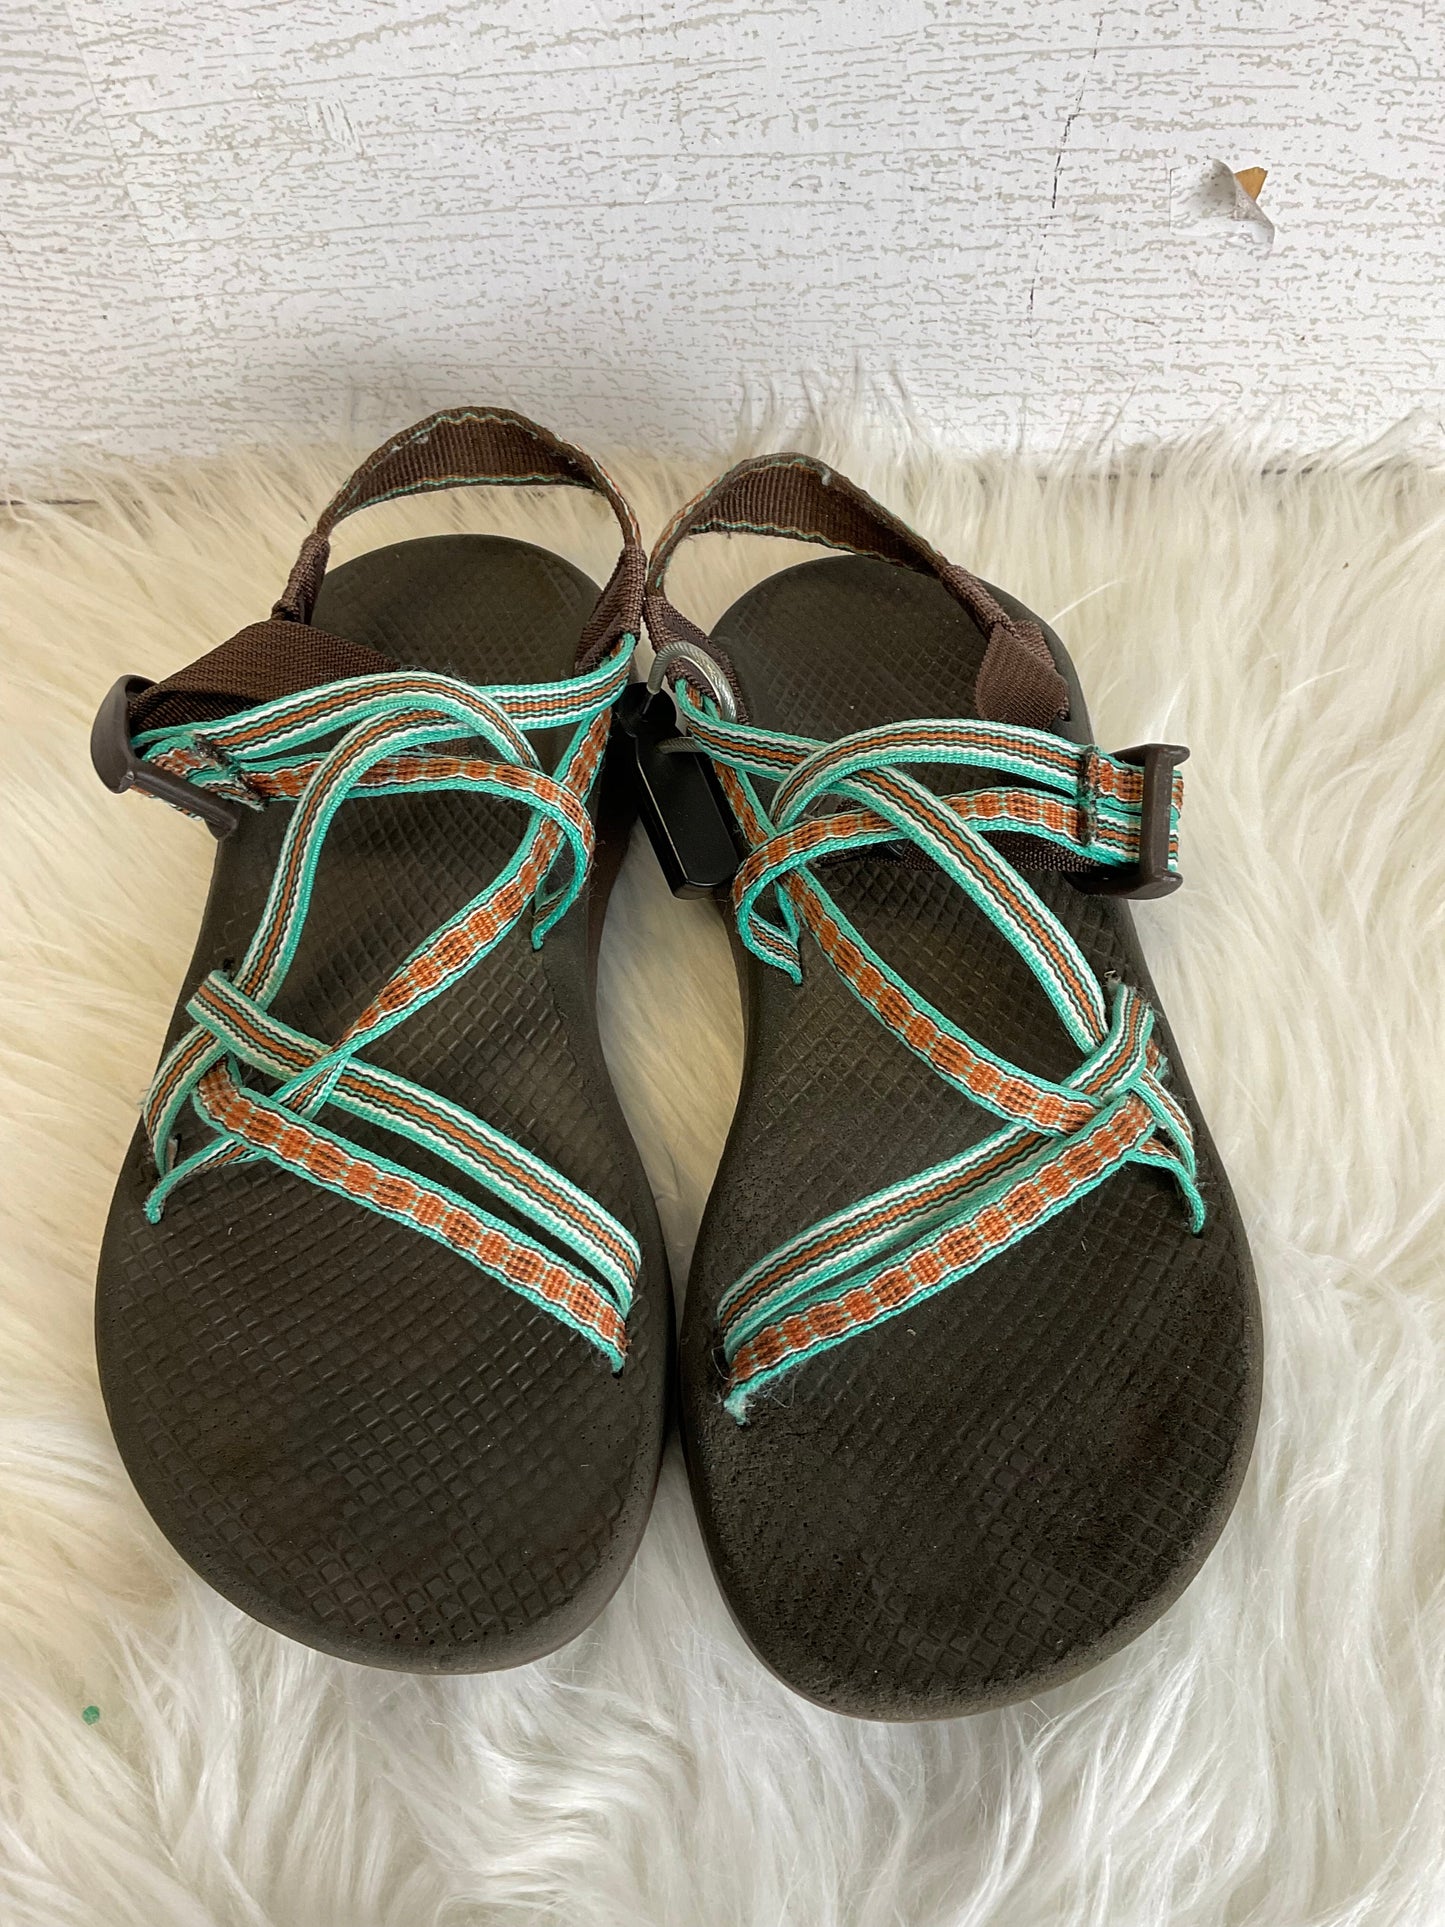 Brown Sandals Flats Chacos, Size 8